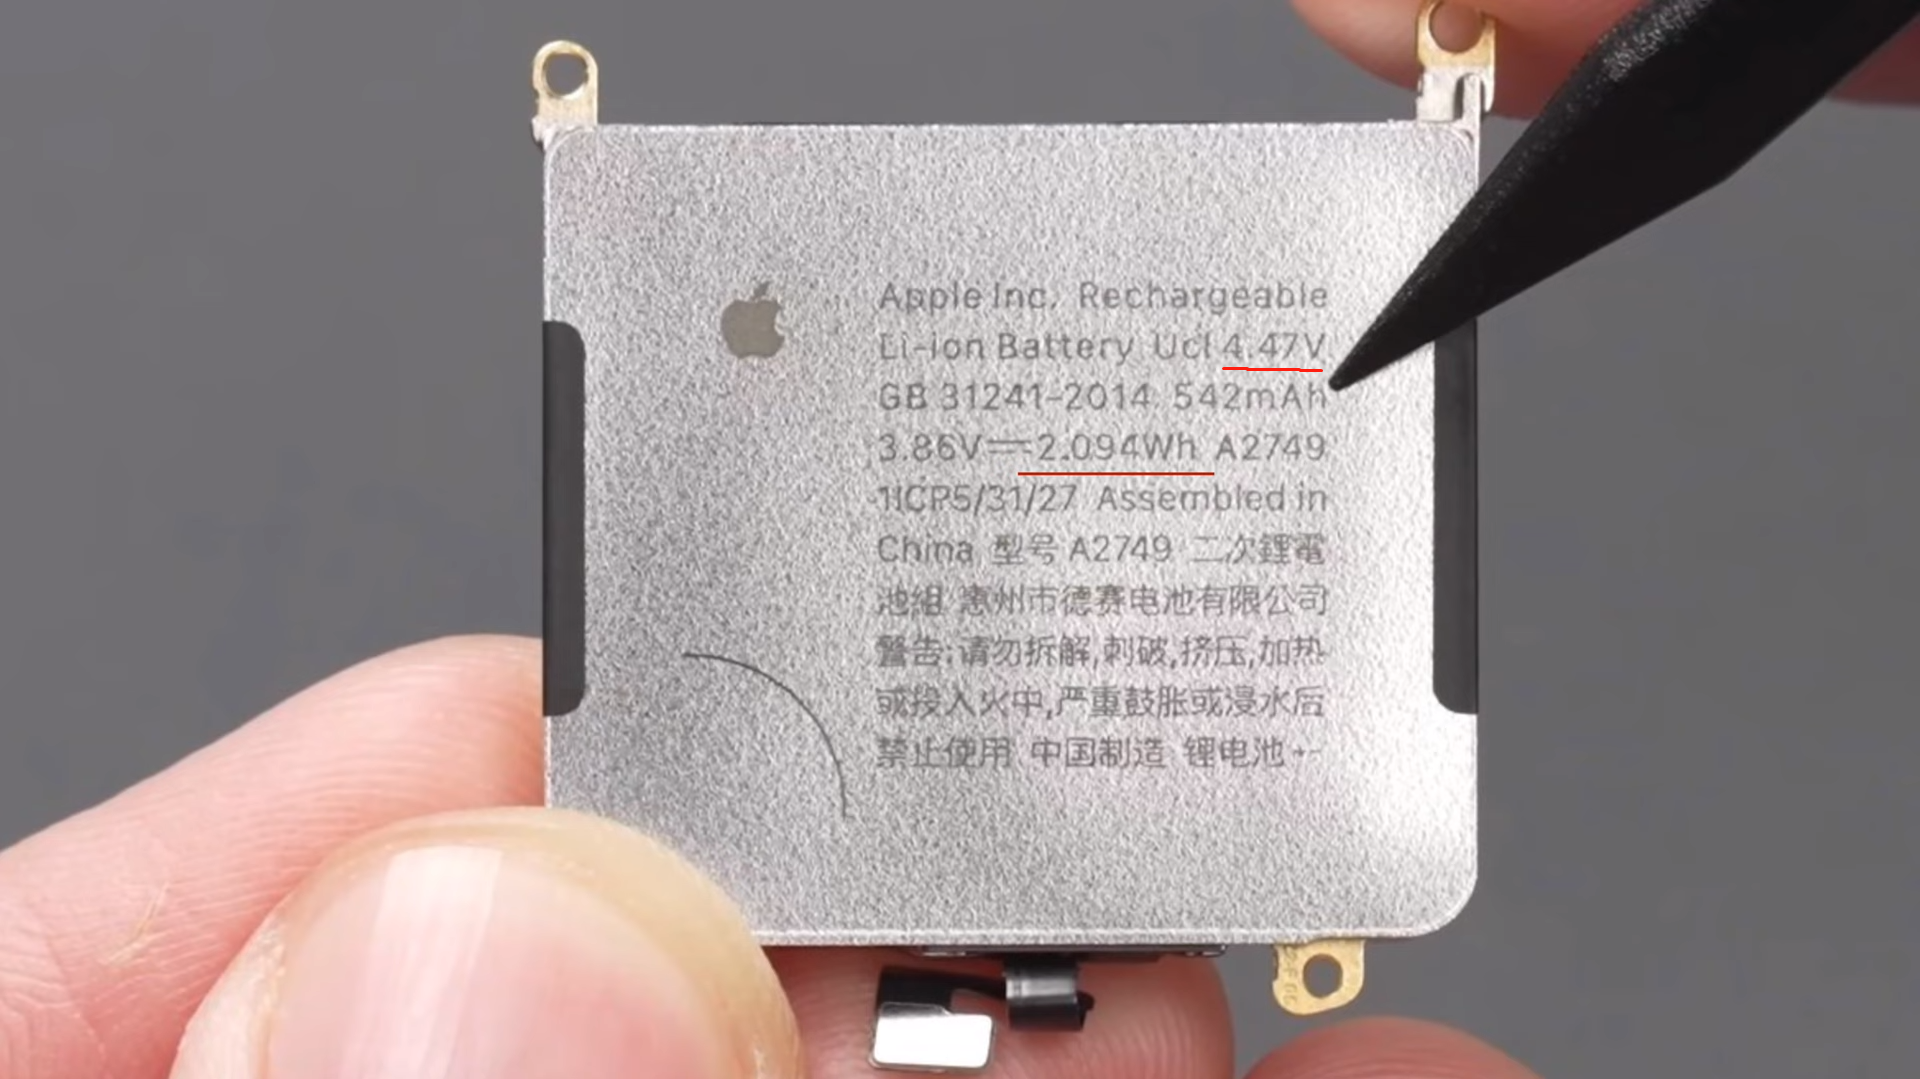 Why Small Wearable Devices / Apple Watch Charges So Slowly?-Chargerlab